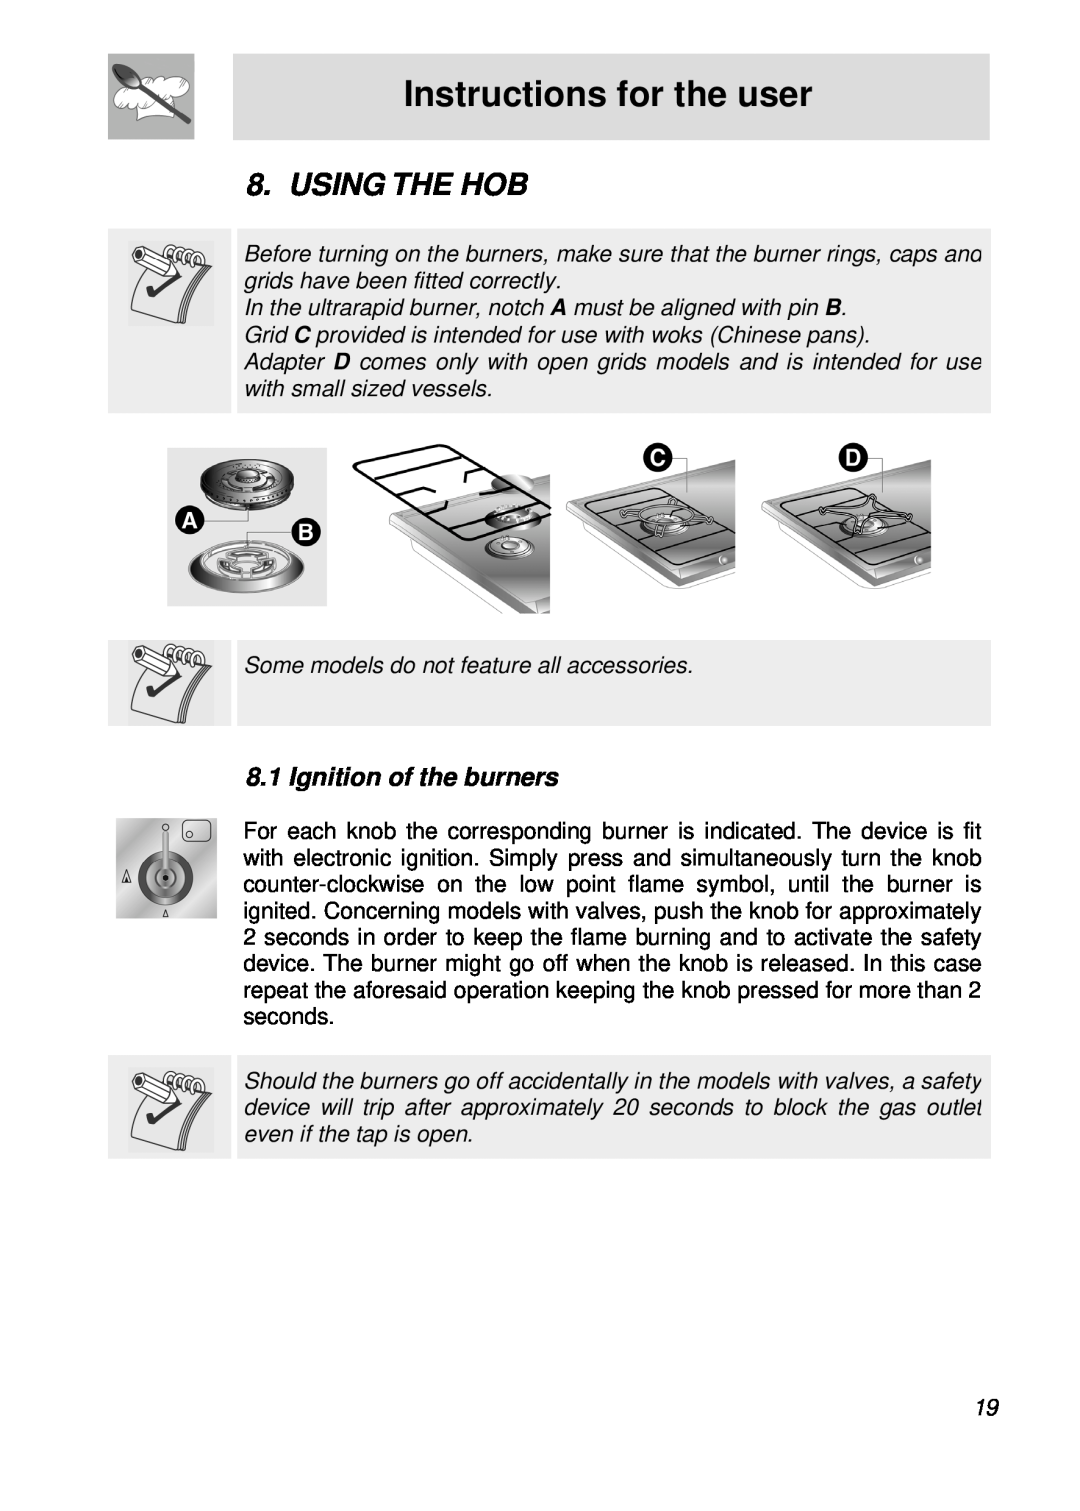 Smeg cooktop, CIR60X manual Instructions for the user, Using The Hob, Ignition of the burners 